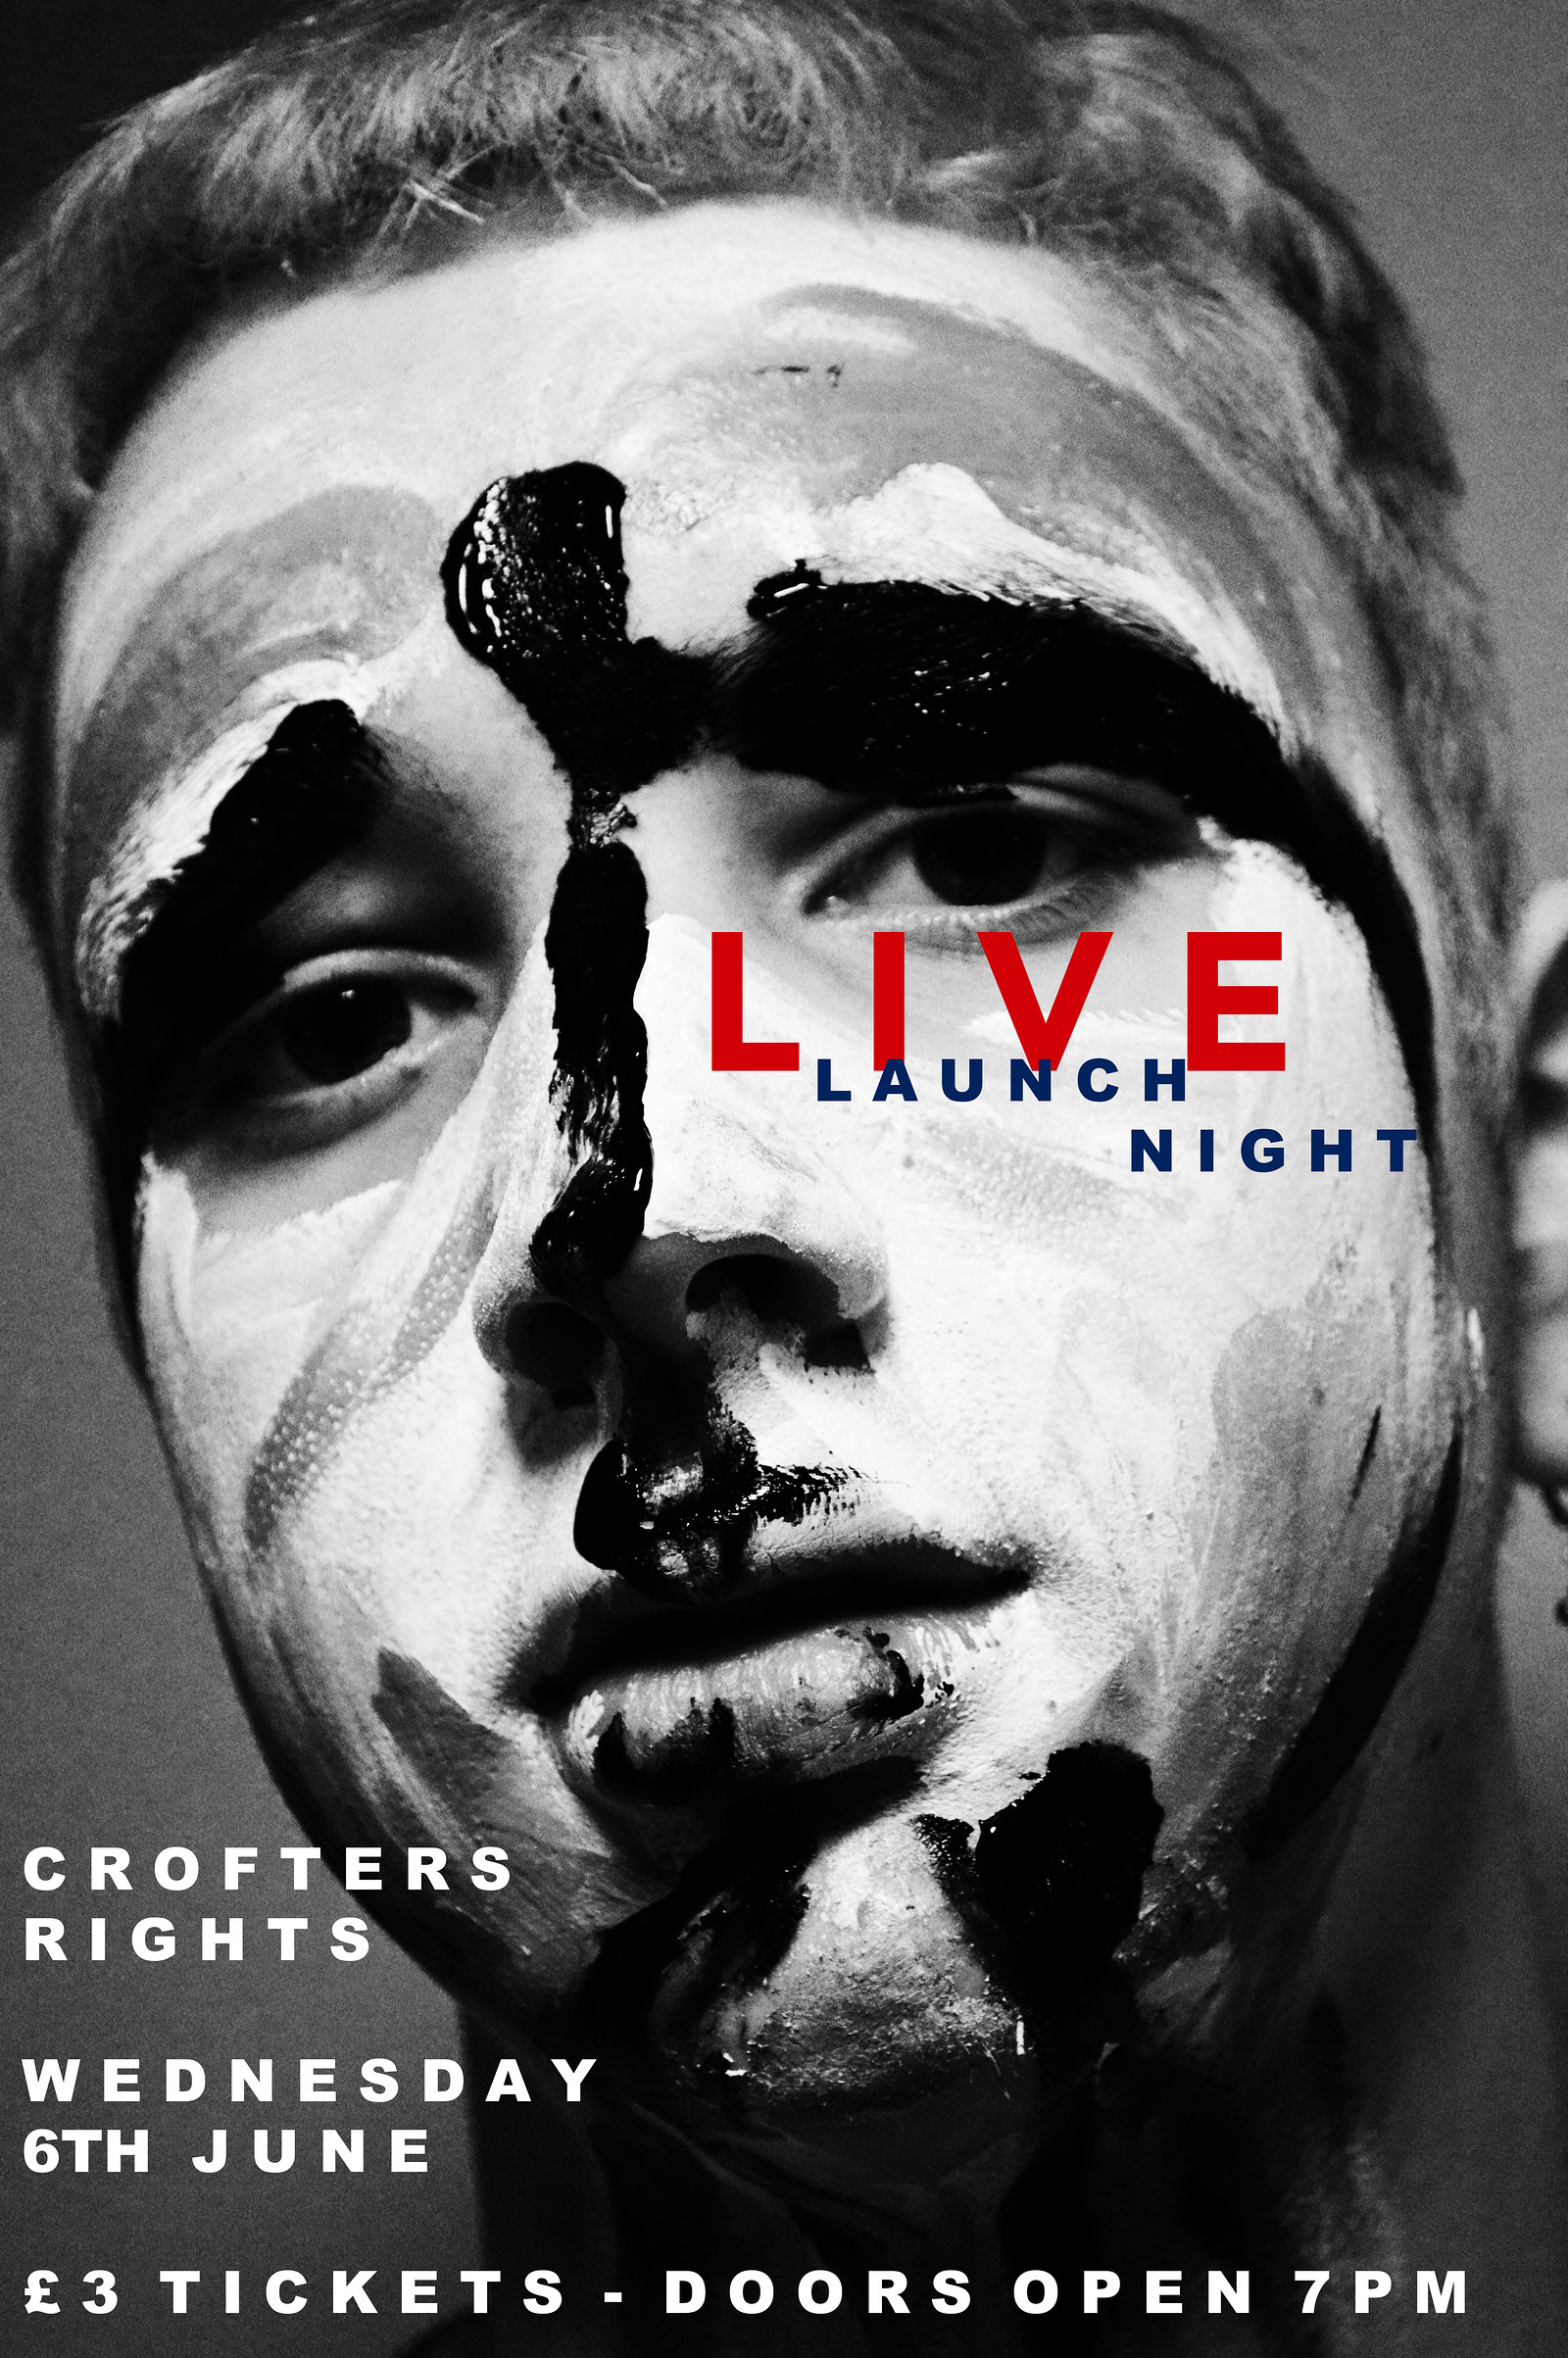 Launch Night at Crofters Rights